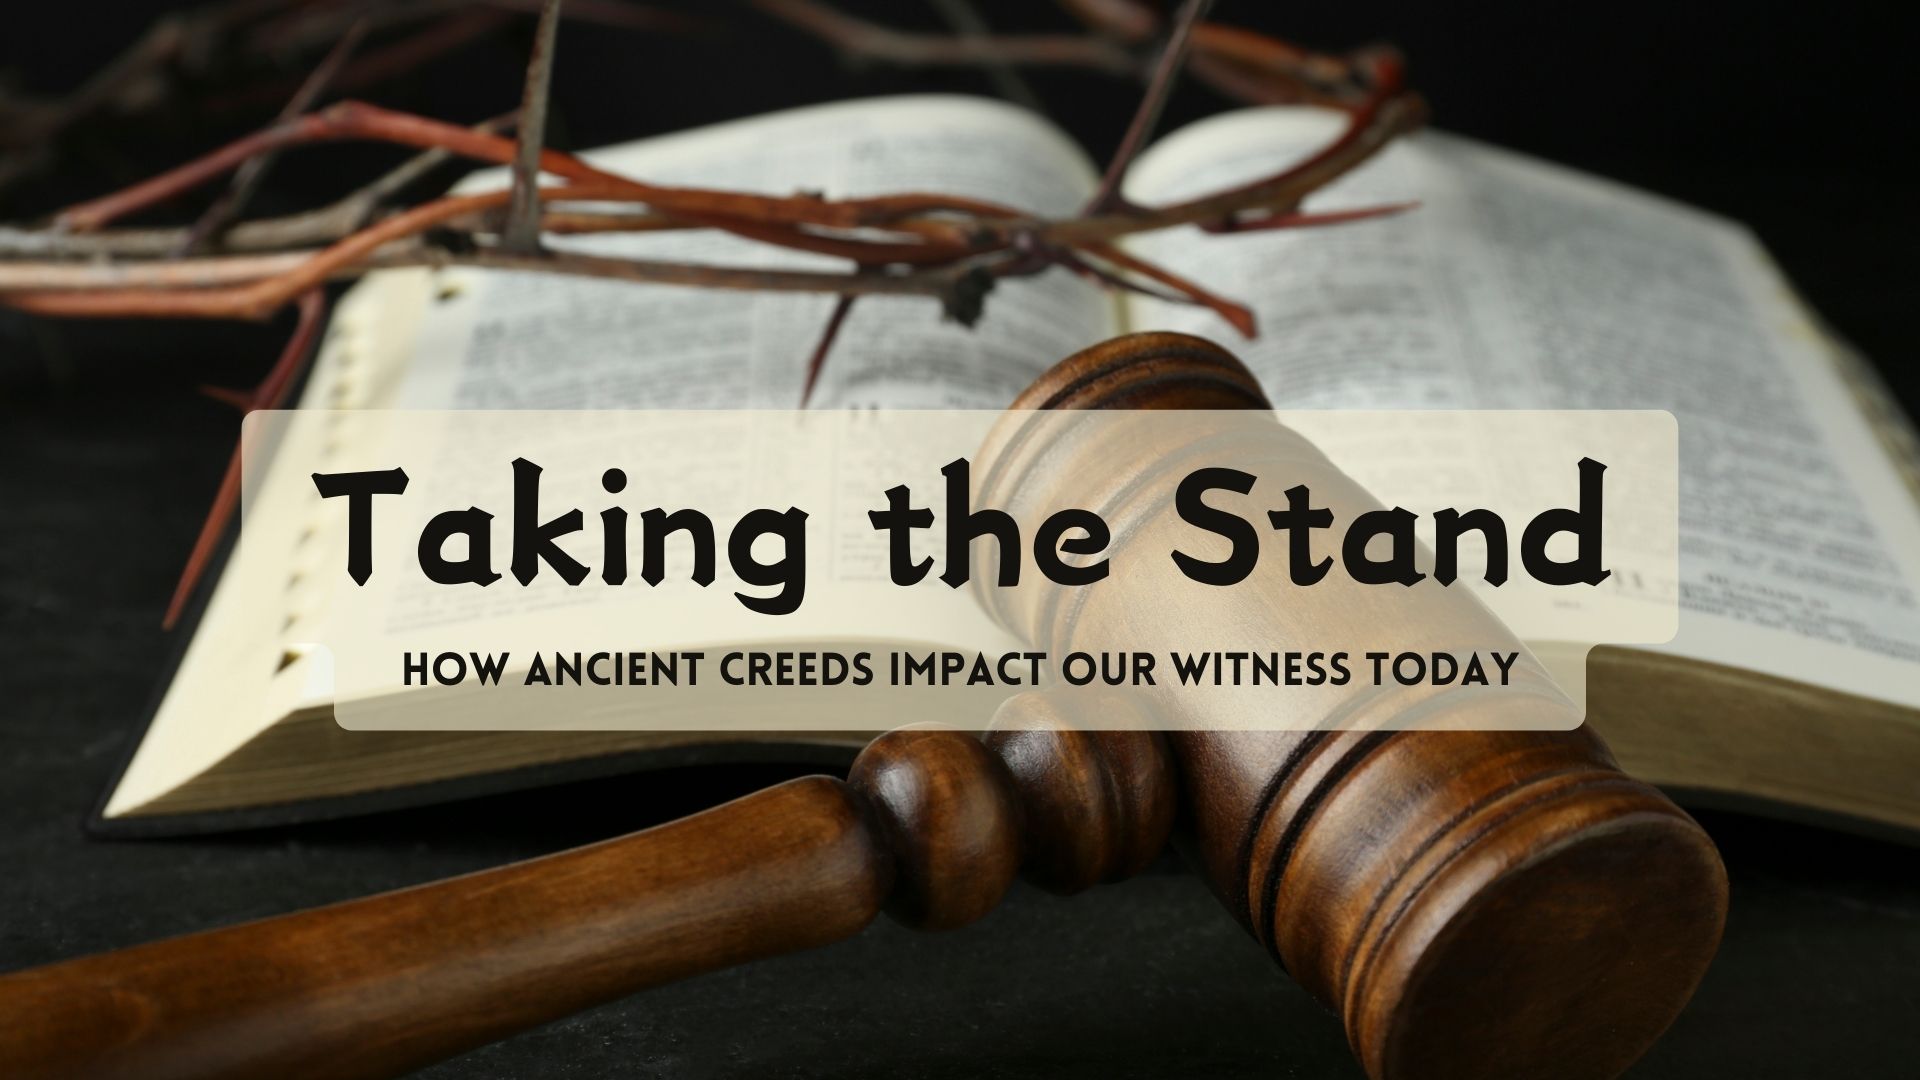 Taking the Stand: Responding to Evil